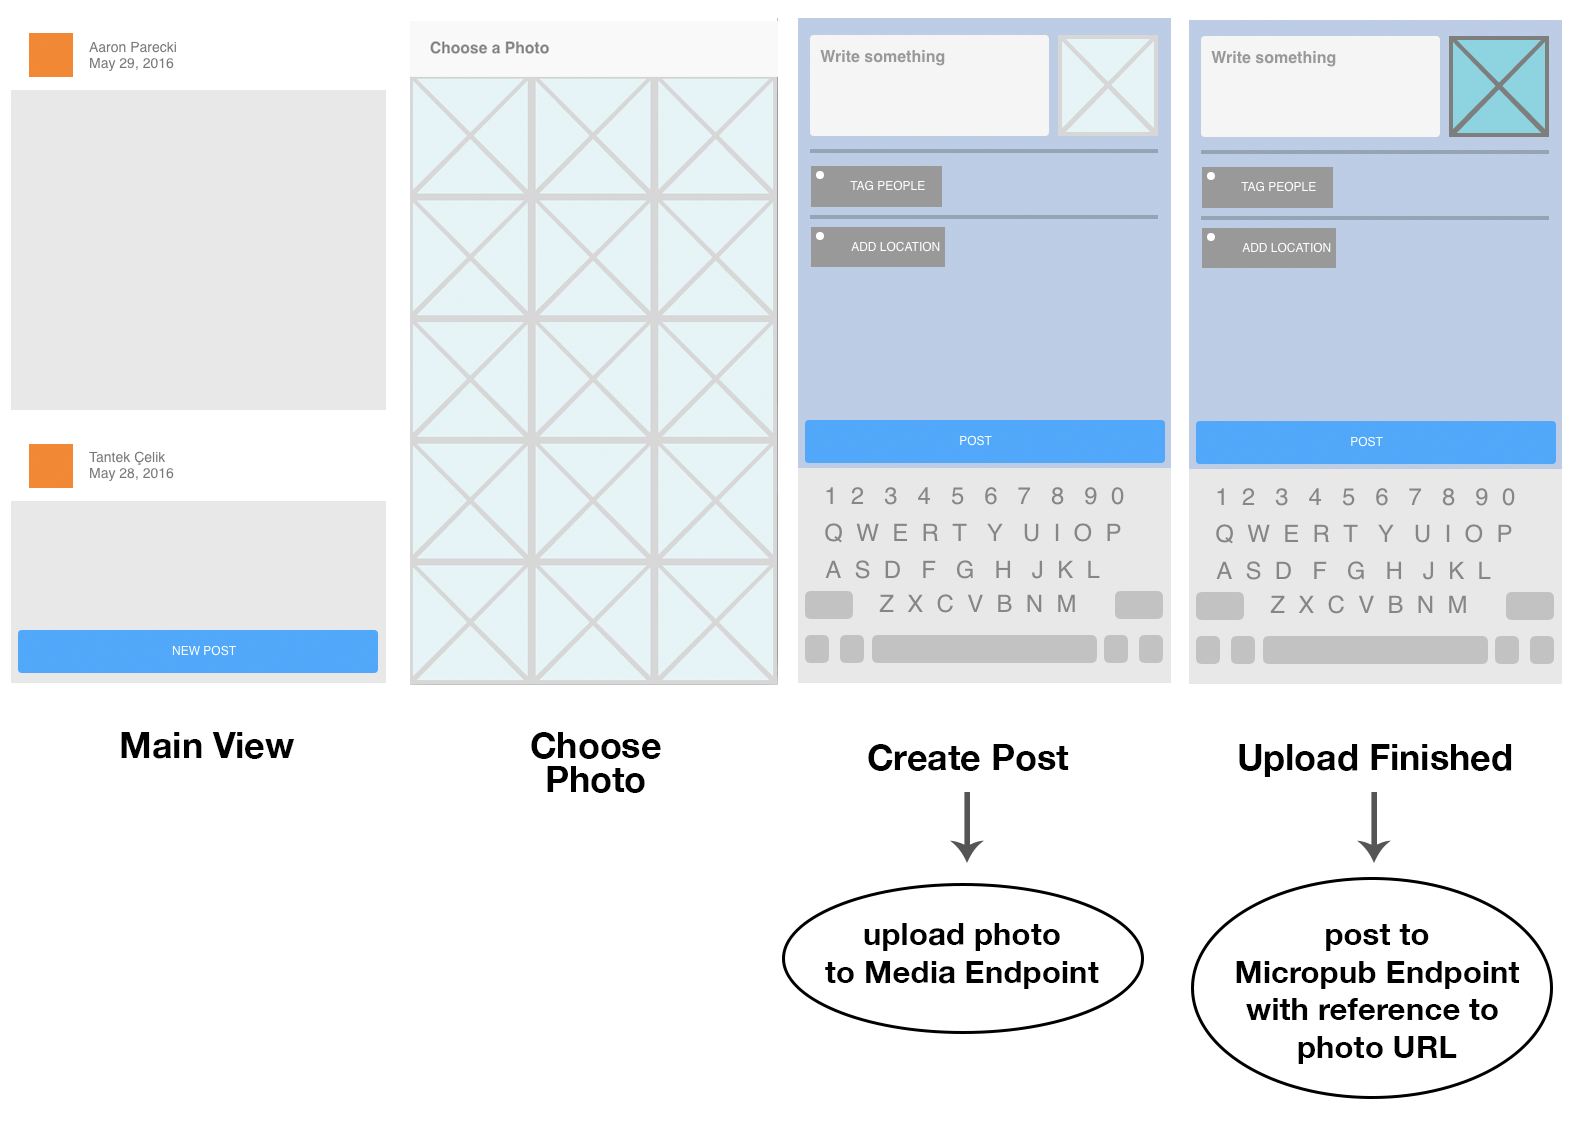 A four-panel diagram of an application illustrating the main view of the application, choosing a photo to upload, uploading the photo to the Media Endpoint while the user enters text, then posting the post contents and photo URL to the Micropub endpoint.